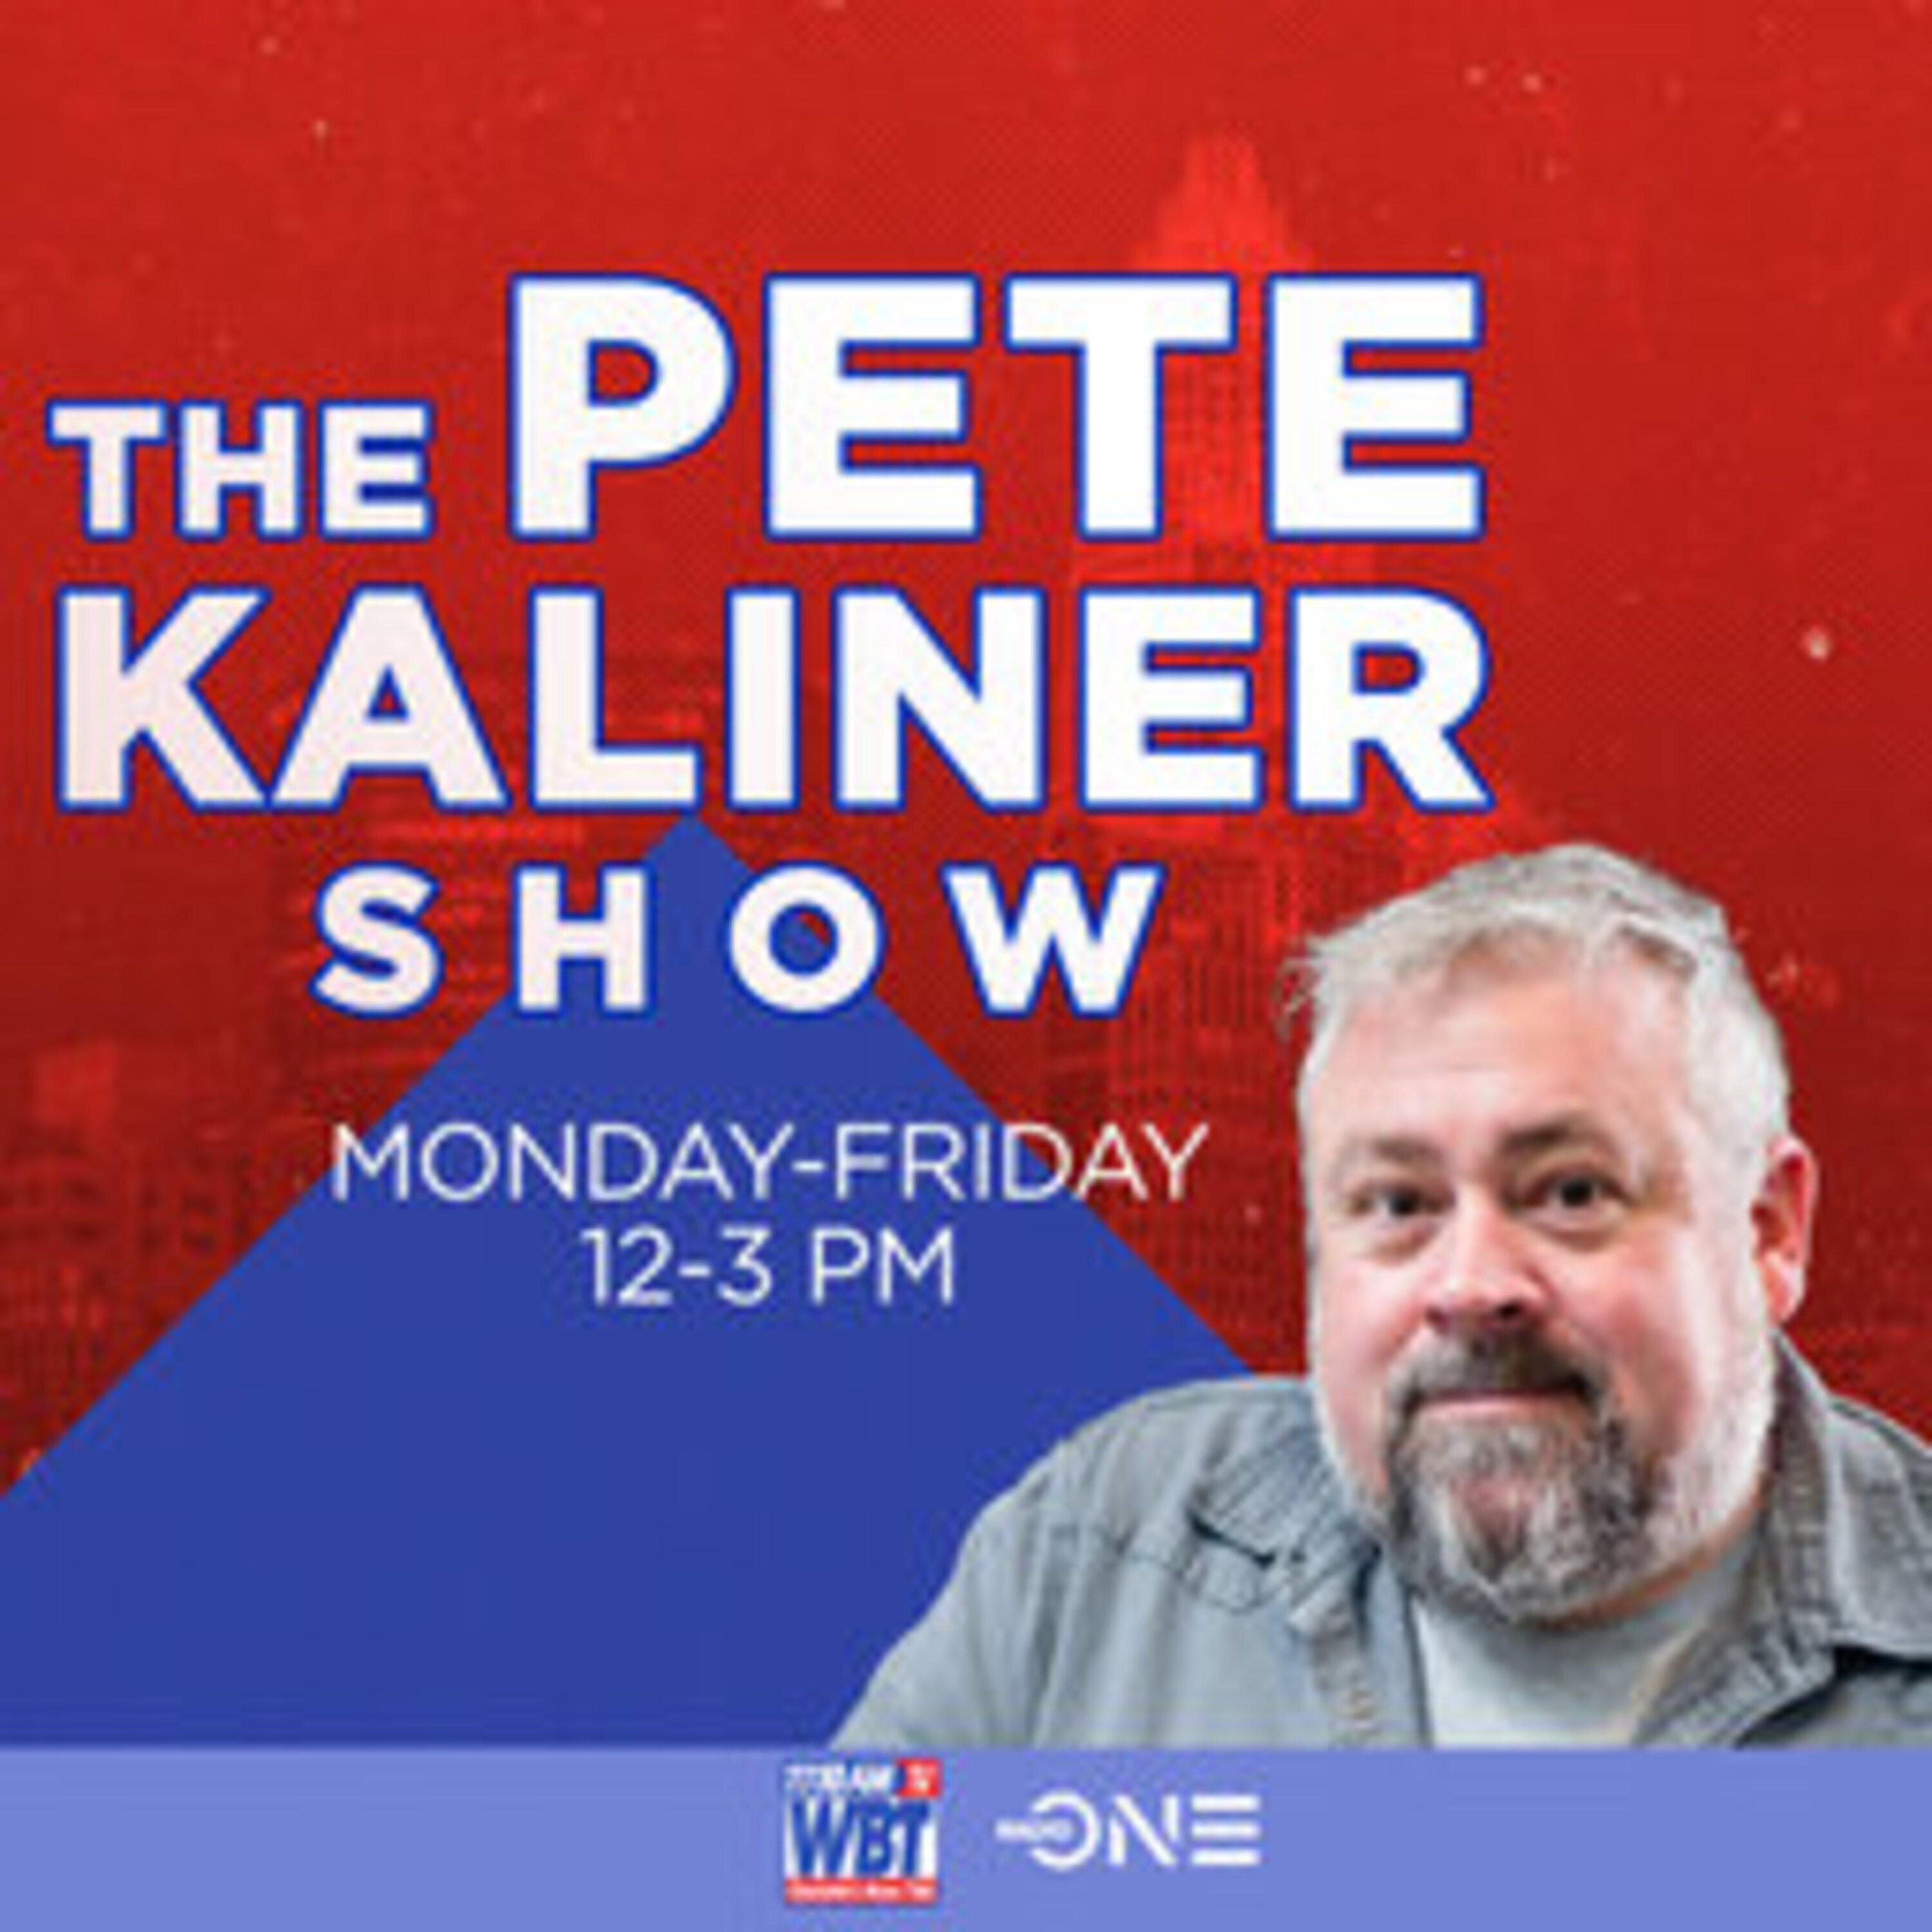 Pete Kaliner: After Events Like Rittenhouse Or Waukesha Incident - Dont Rush A Hot Take